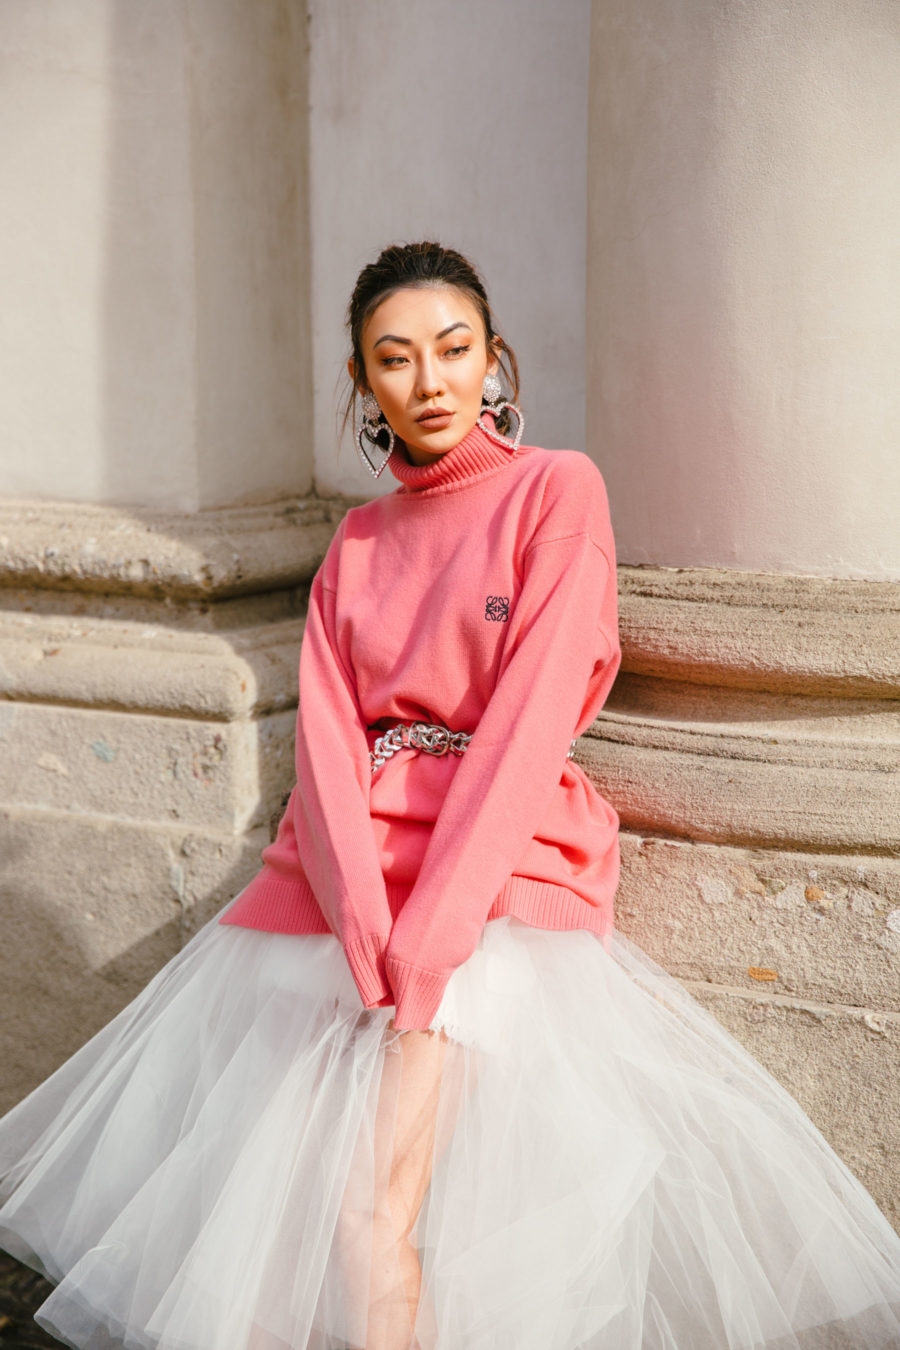 fashion blogger jessica wang wears pink loewe sweater while sharing the best labor day sales // Jessica Wang - Notjessfashion.com